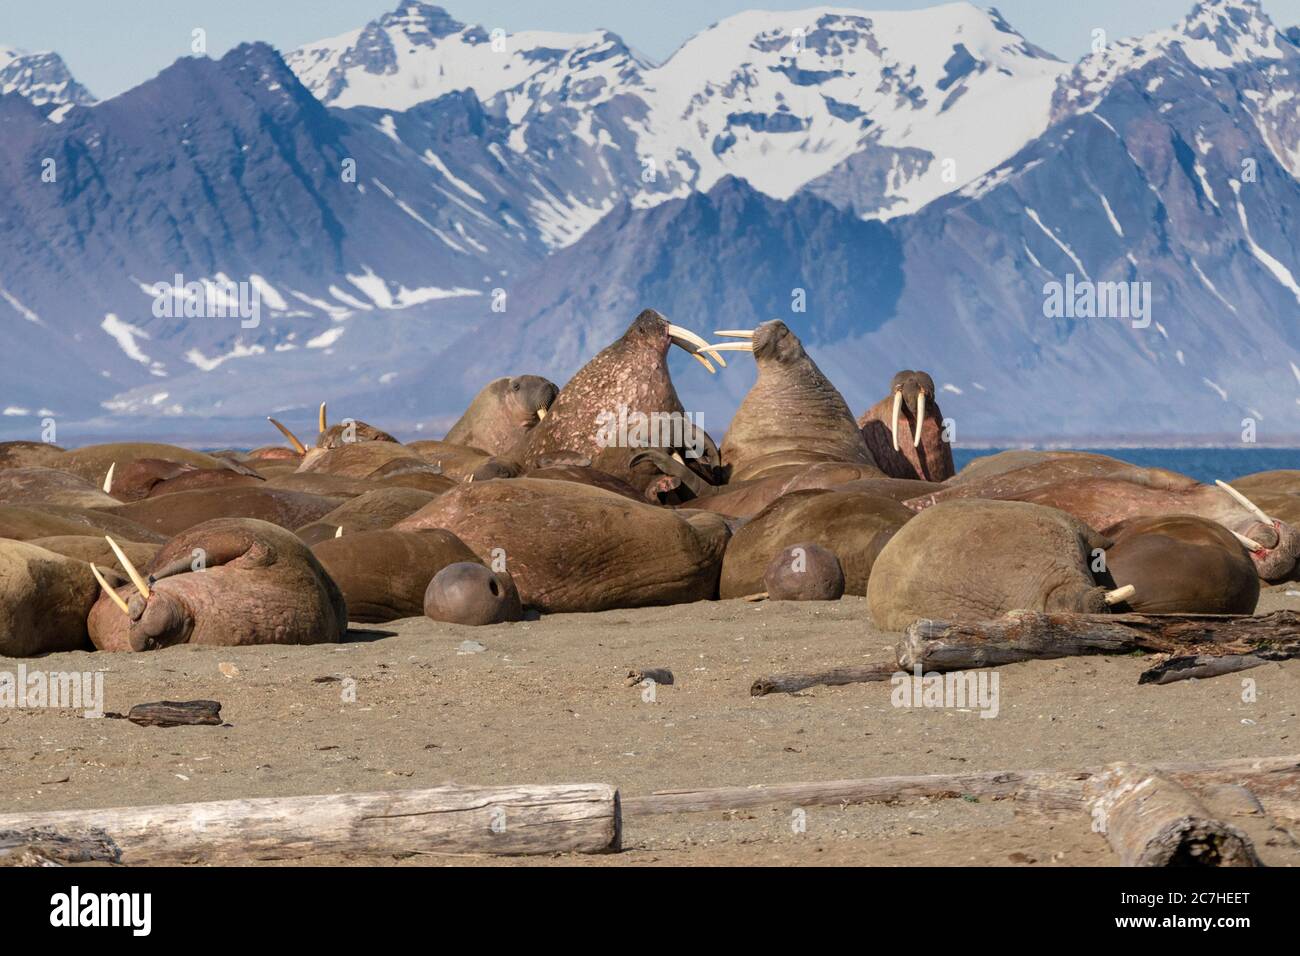 male walruses sparring; tusks in action; walruses in a large huddle; steep barren mountains; snowy background; Arctic coastline Stock Photo